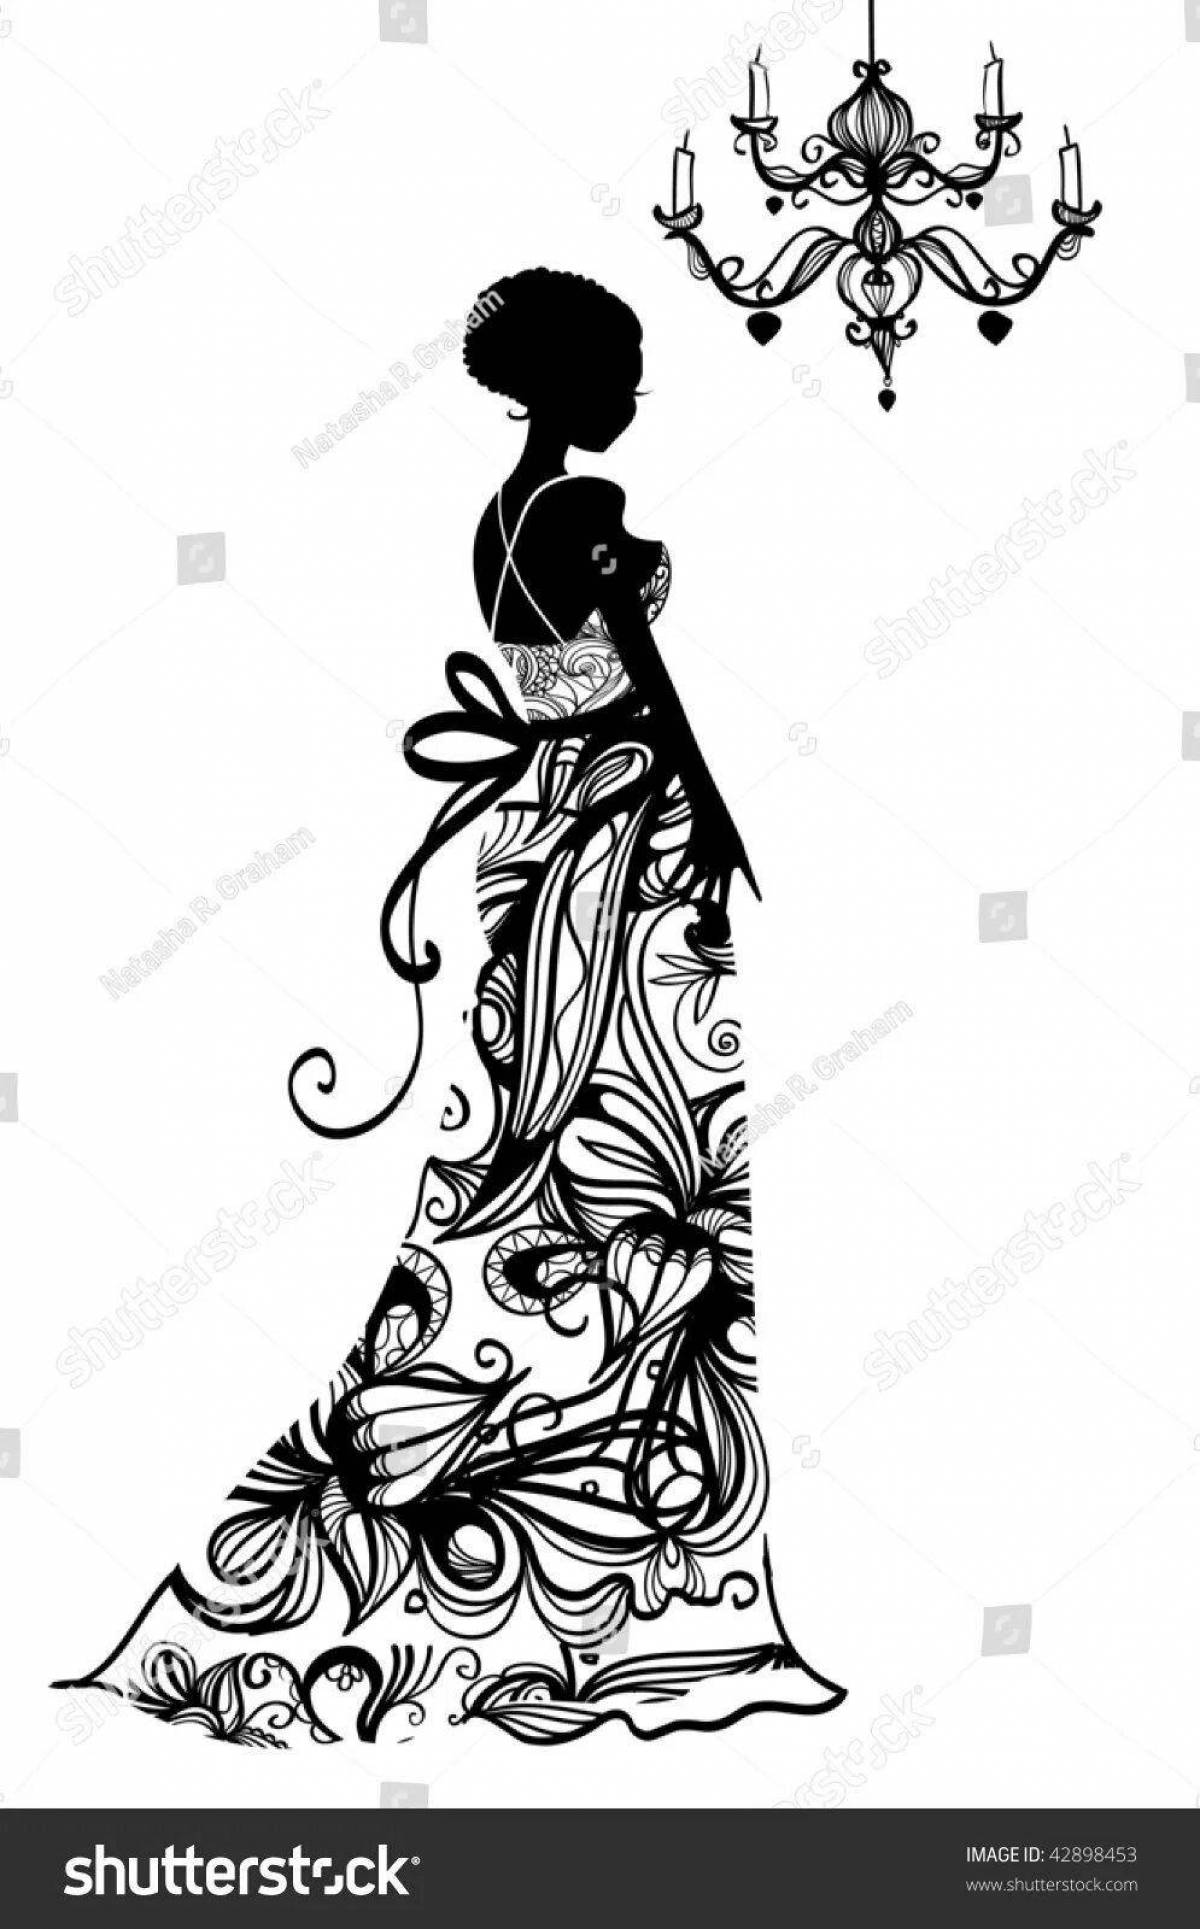 Playful coloring of the silhouette of a girl in a dress